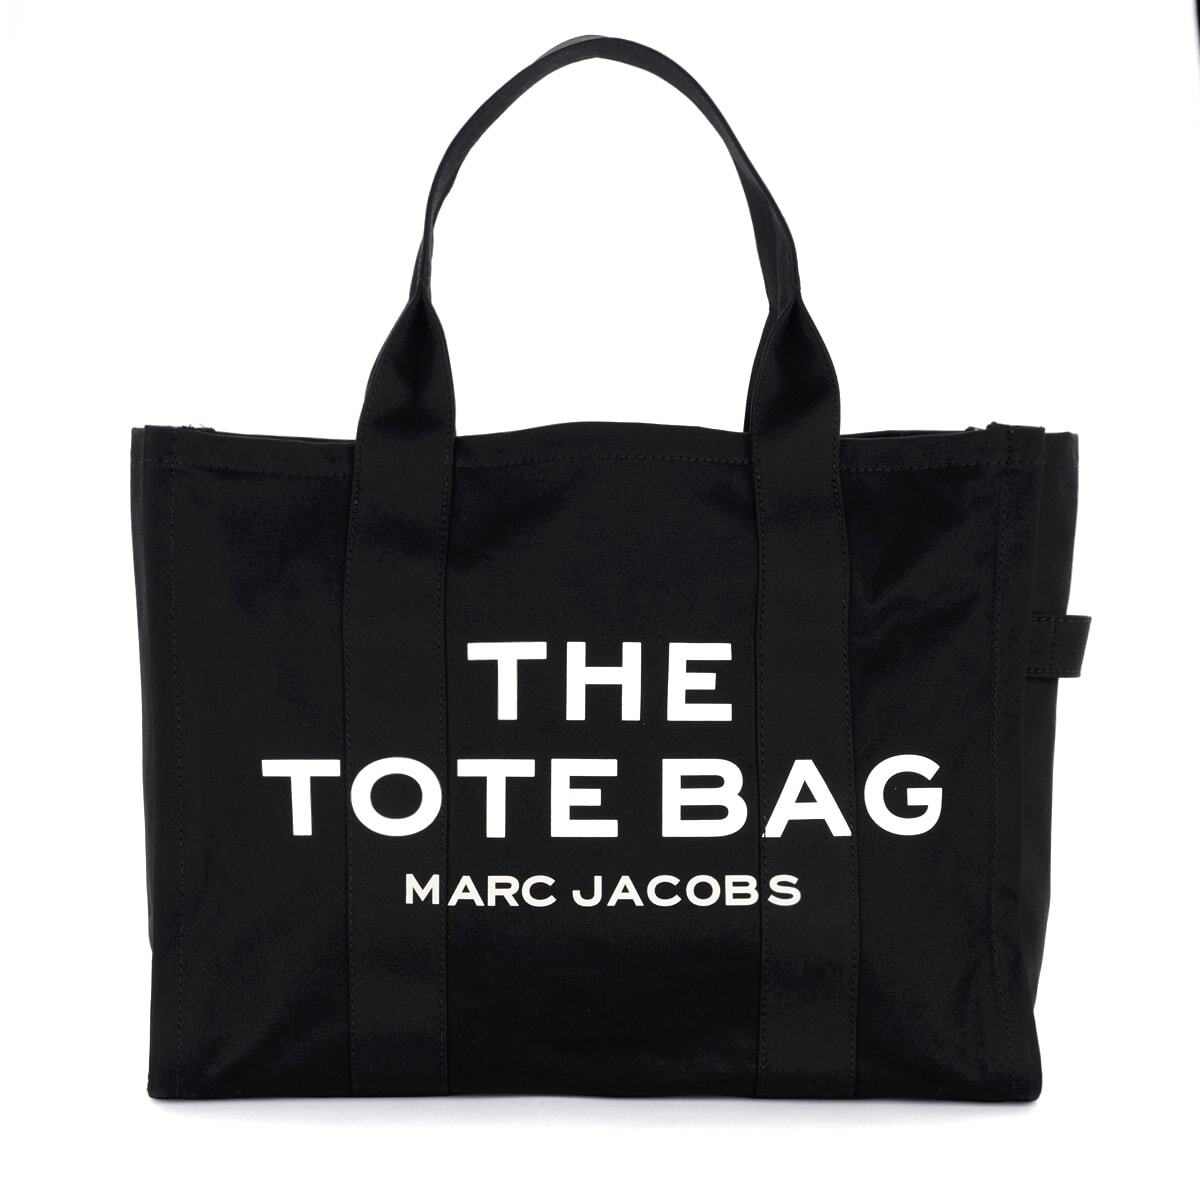 The Marc Jacobs The Xl Tote Bag Black in nero